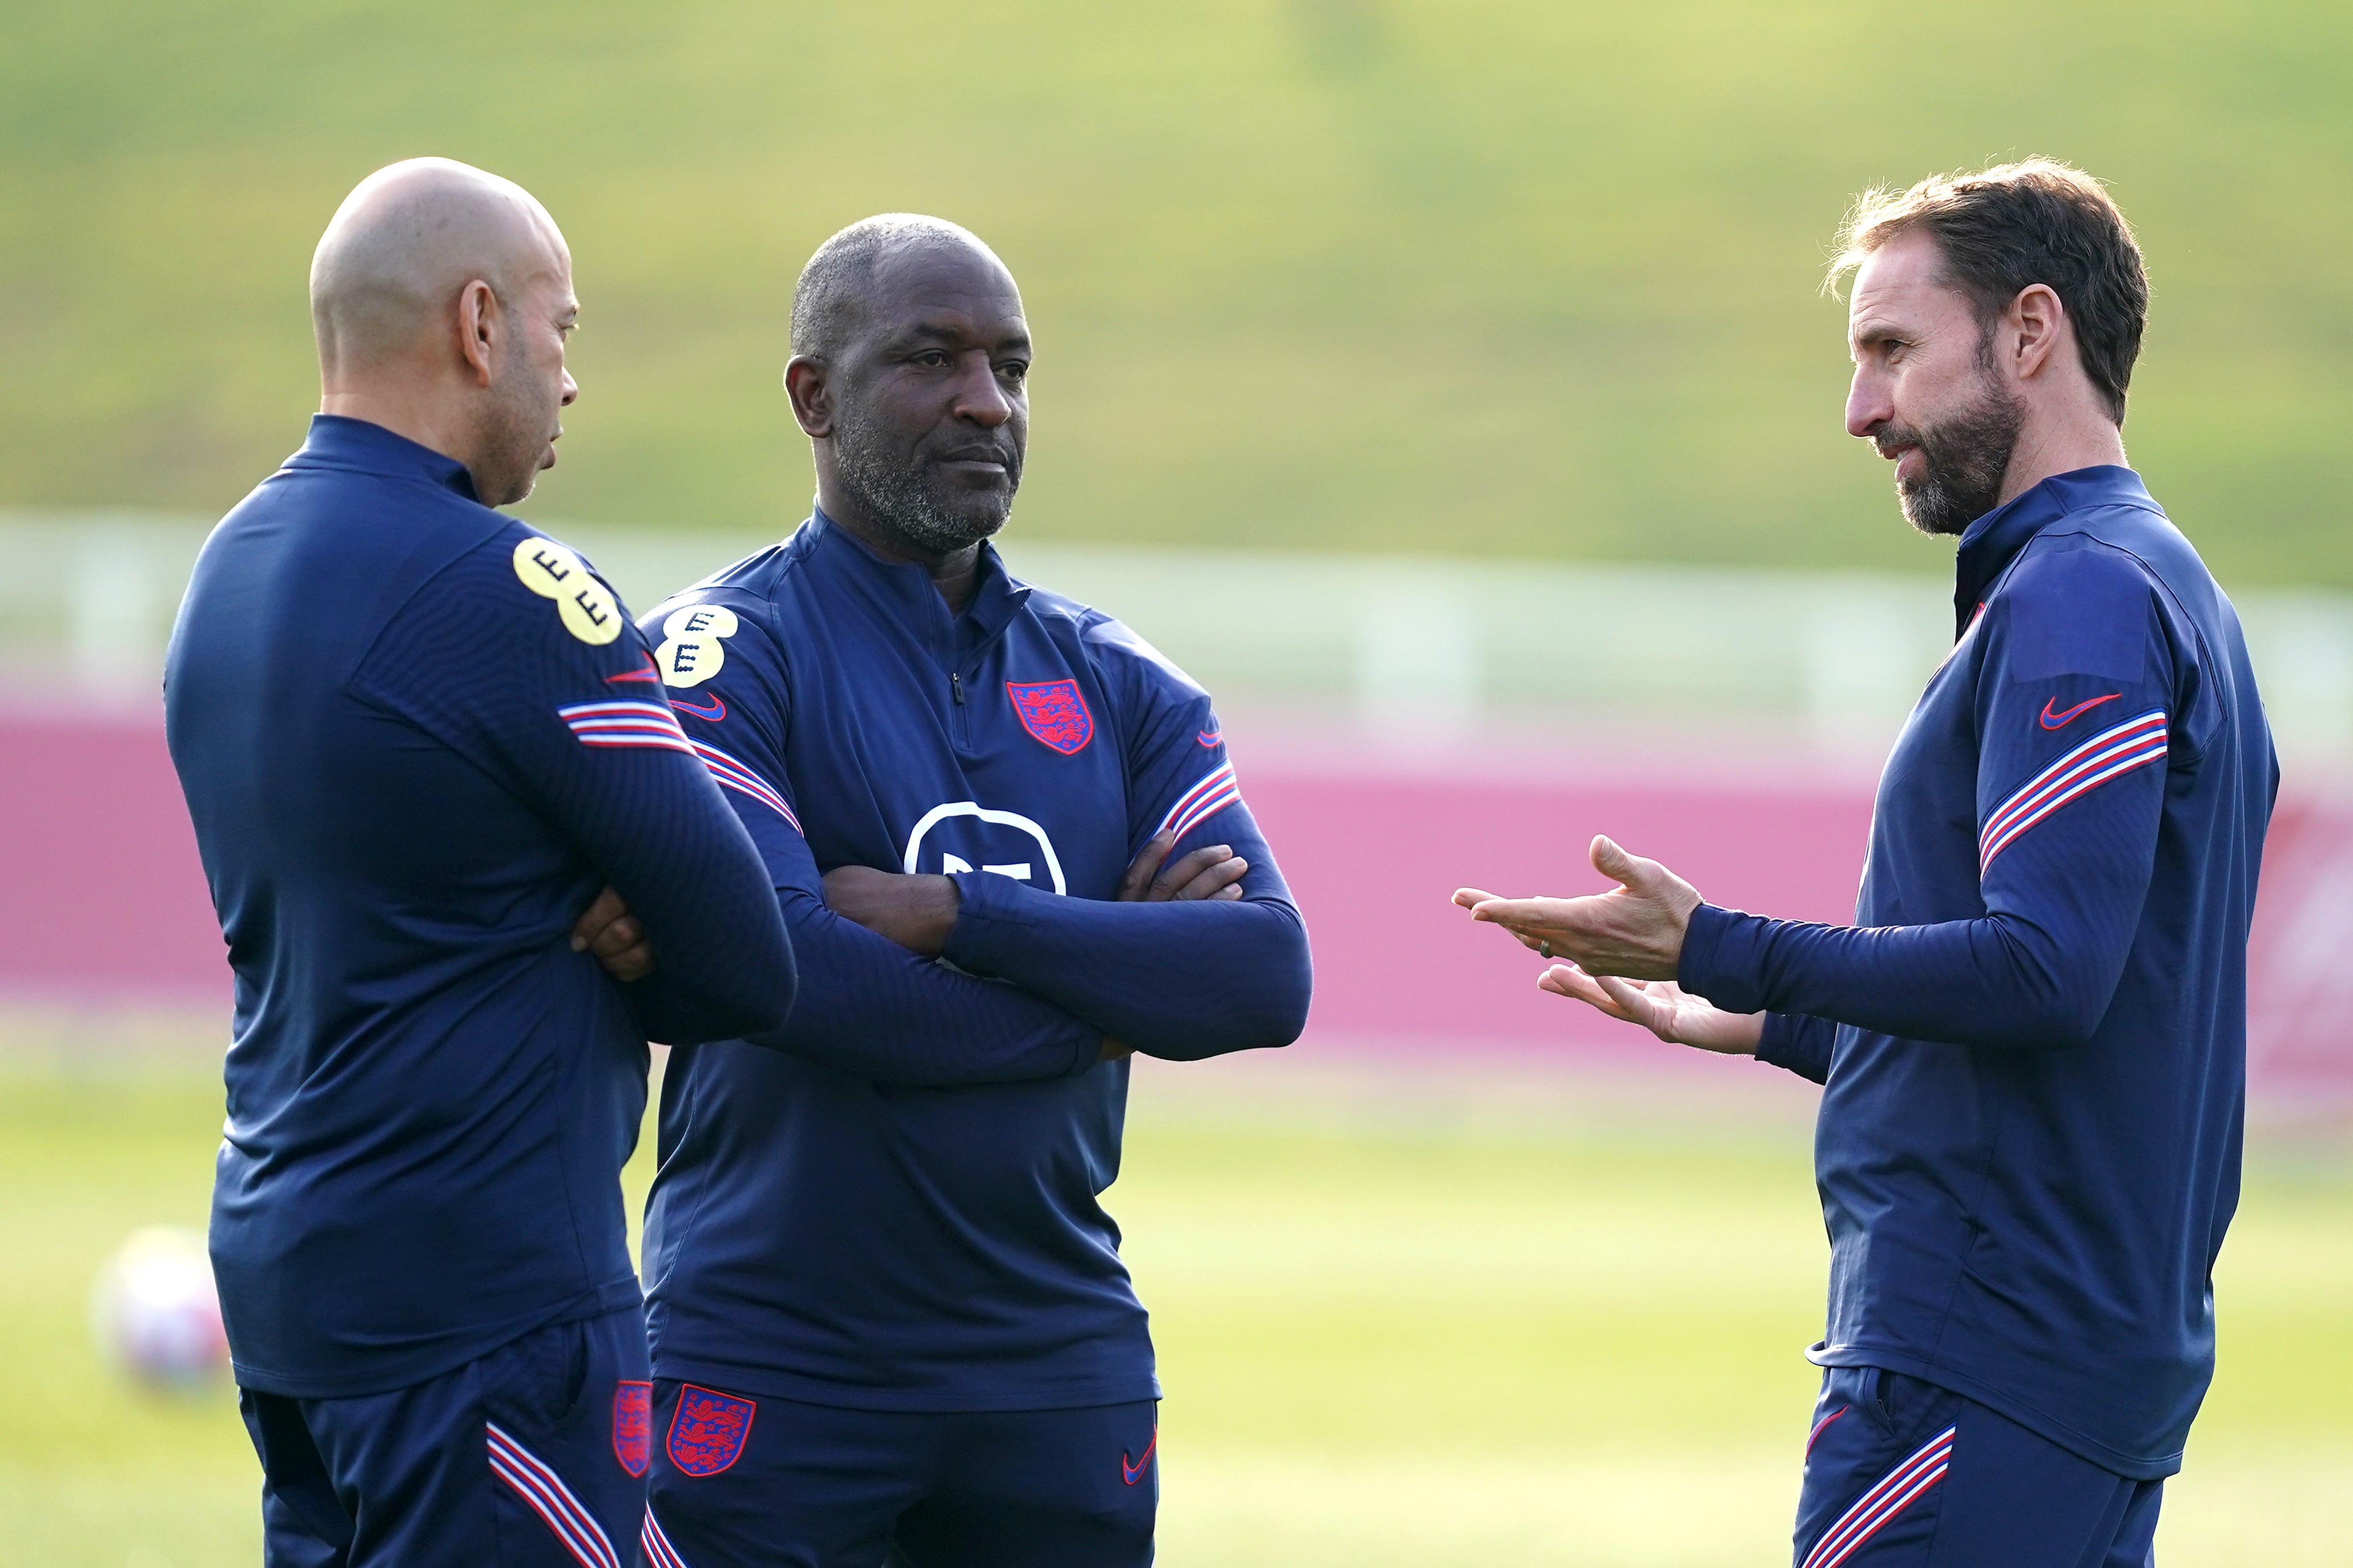 England manager Gareth Southgate (right) with first team coaches Chris Powell and Paul Nevin (left) during a training session at St George’s Park (Martin Rickett/PA)